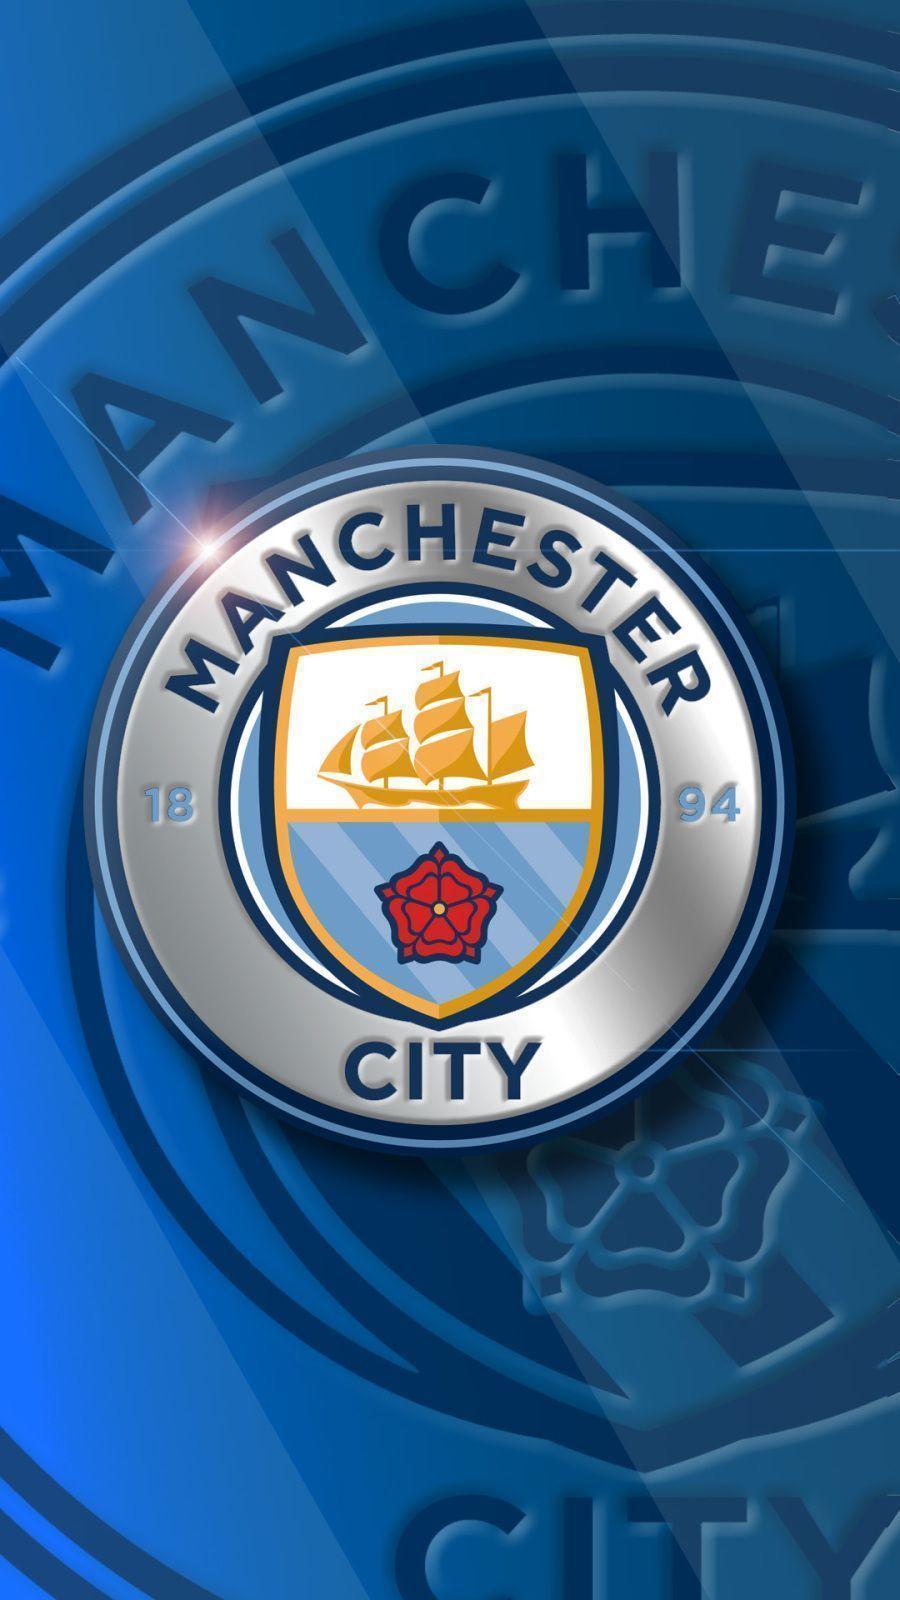 Last Iphone Manchester City Wallpaper 4K Pictures